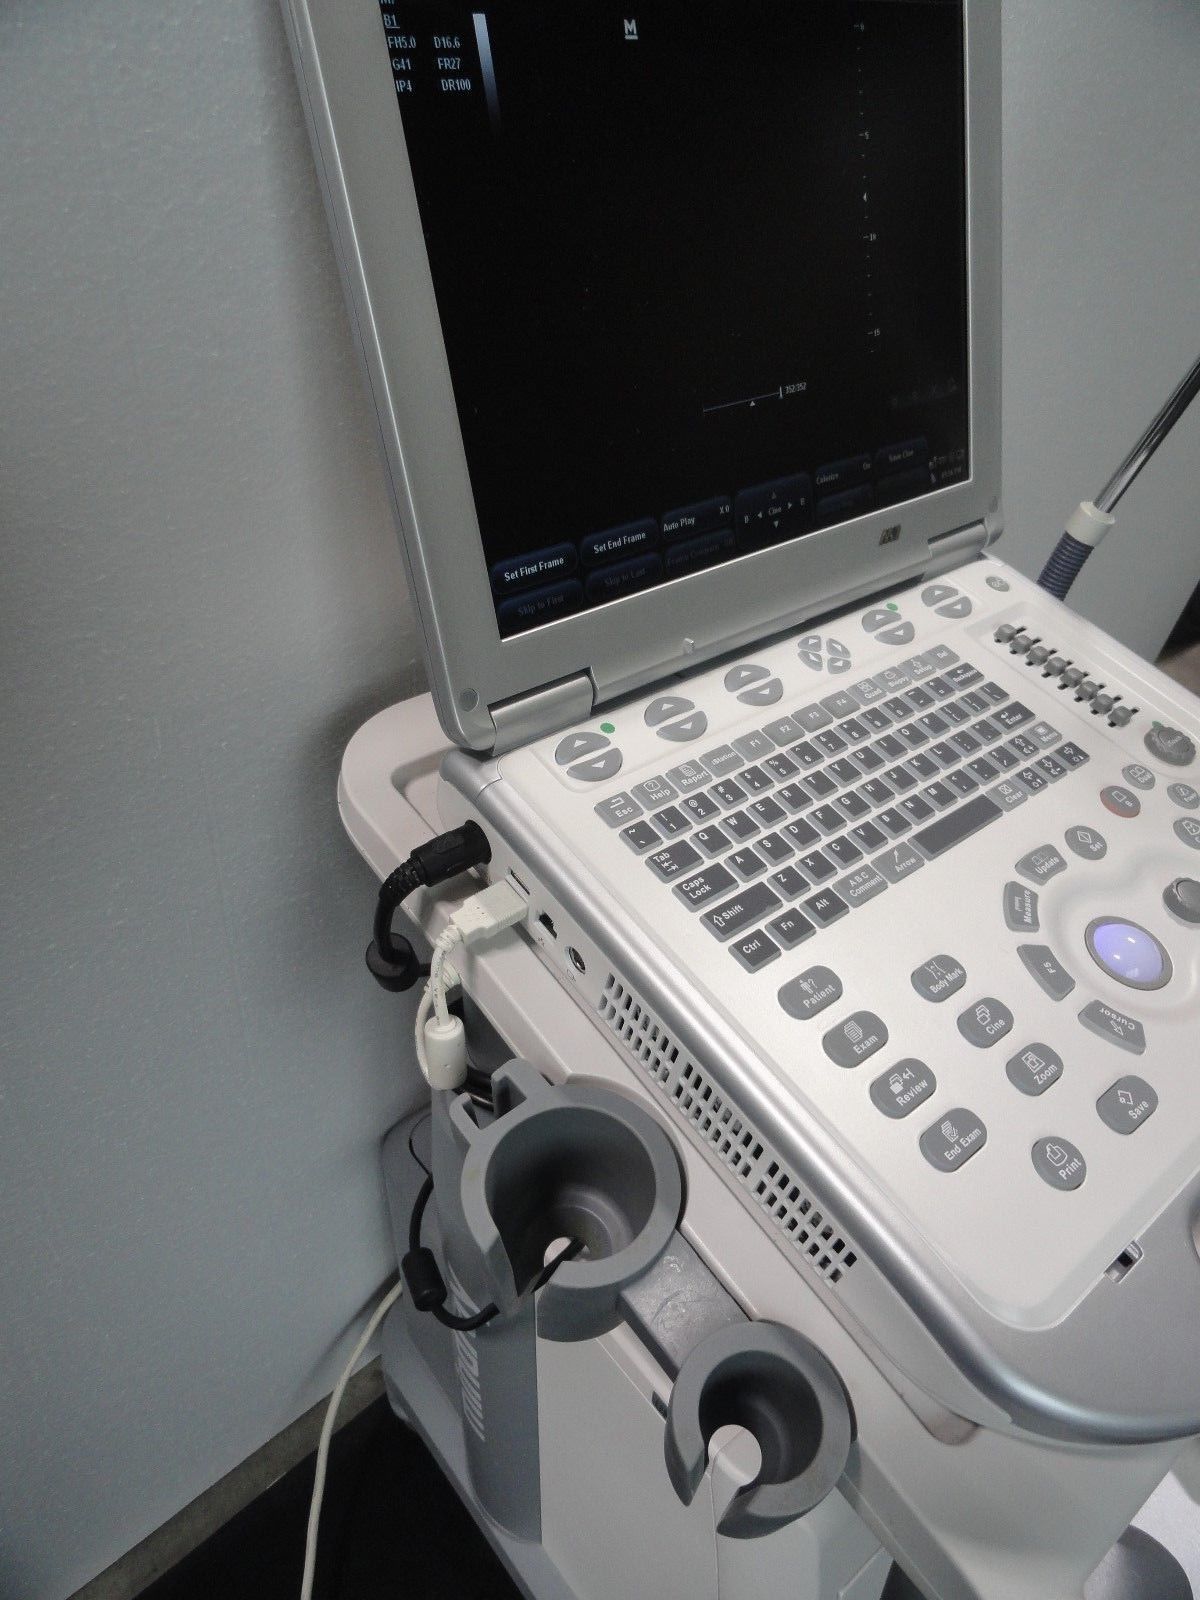 Mindray M7 Portable Ultrasound Loaded unit with 3 probes transducers no sonosite DIAGNOSTIC ULTRASOUND MACHINES FOR SALE